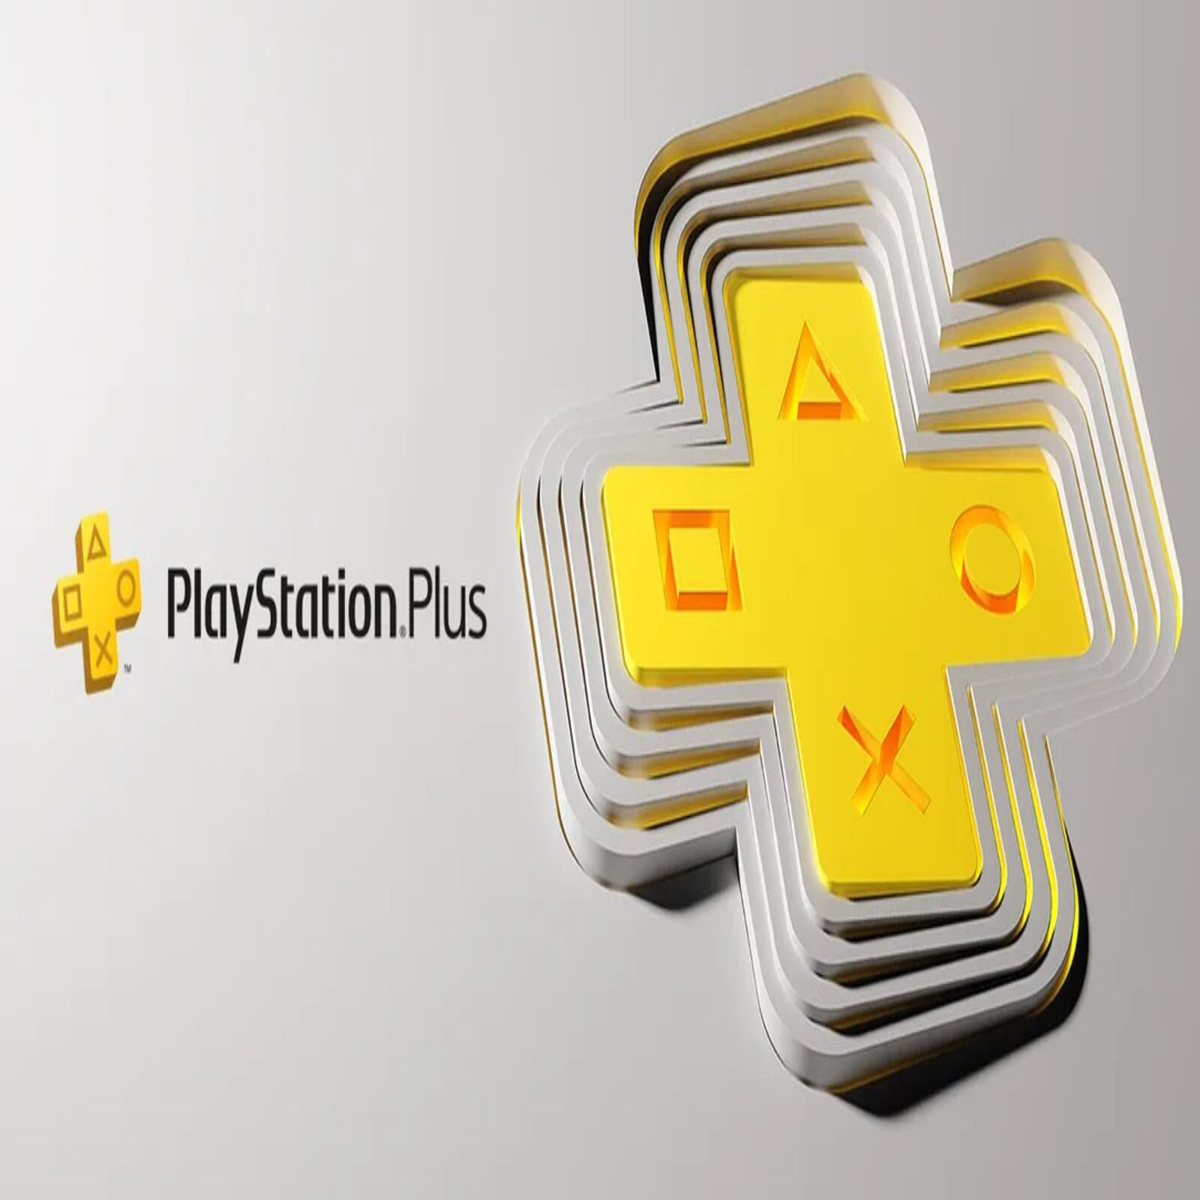 PS Plus Premium: Life is Strange and Devil May Cry 5 lead